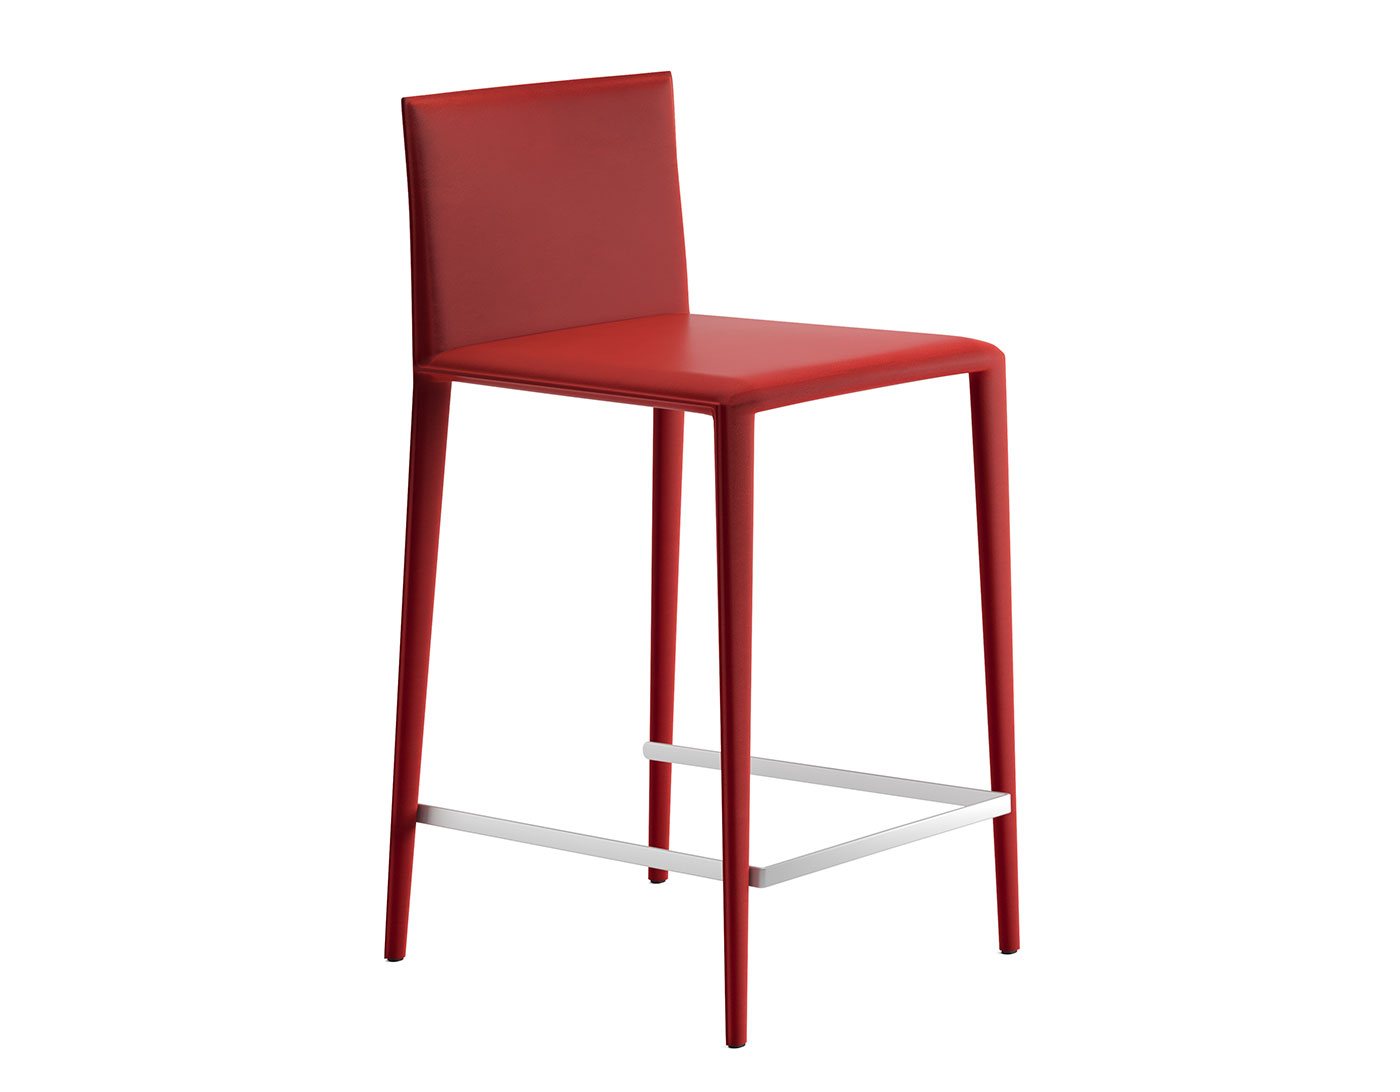 Norma Stool Altherr for | Arper by Molina hive Lievore